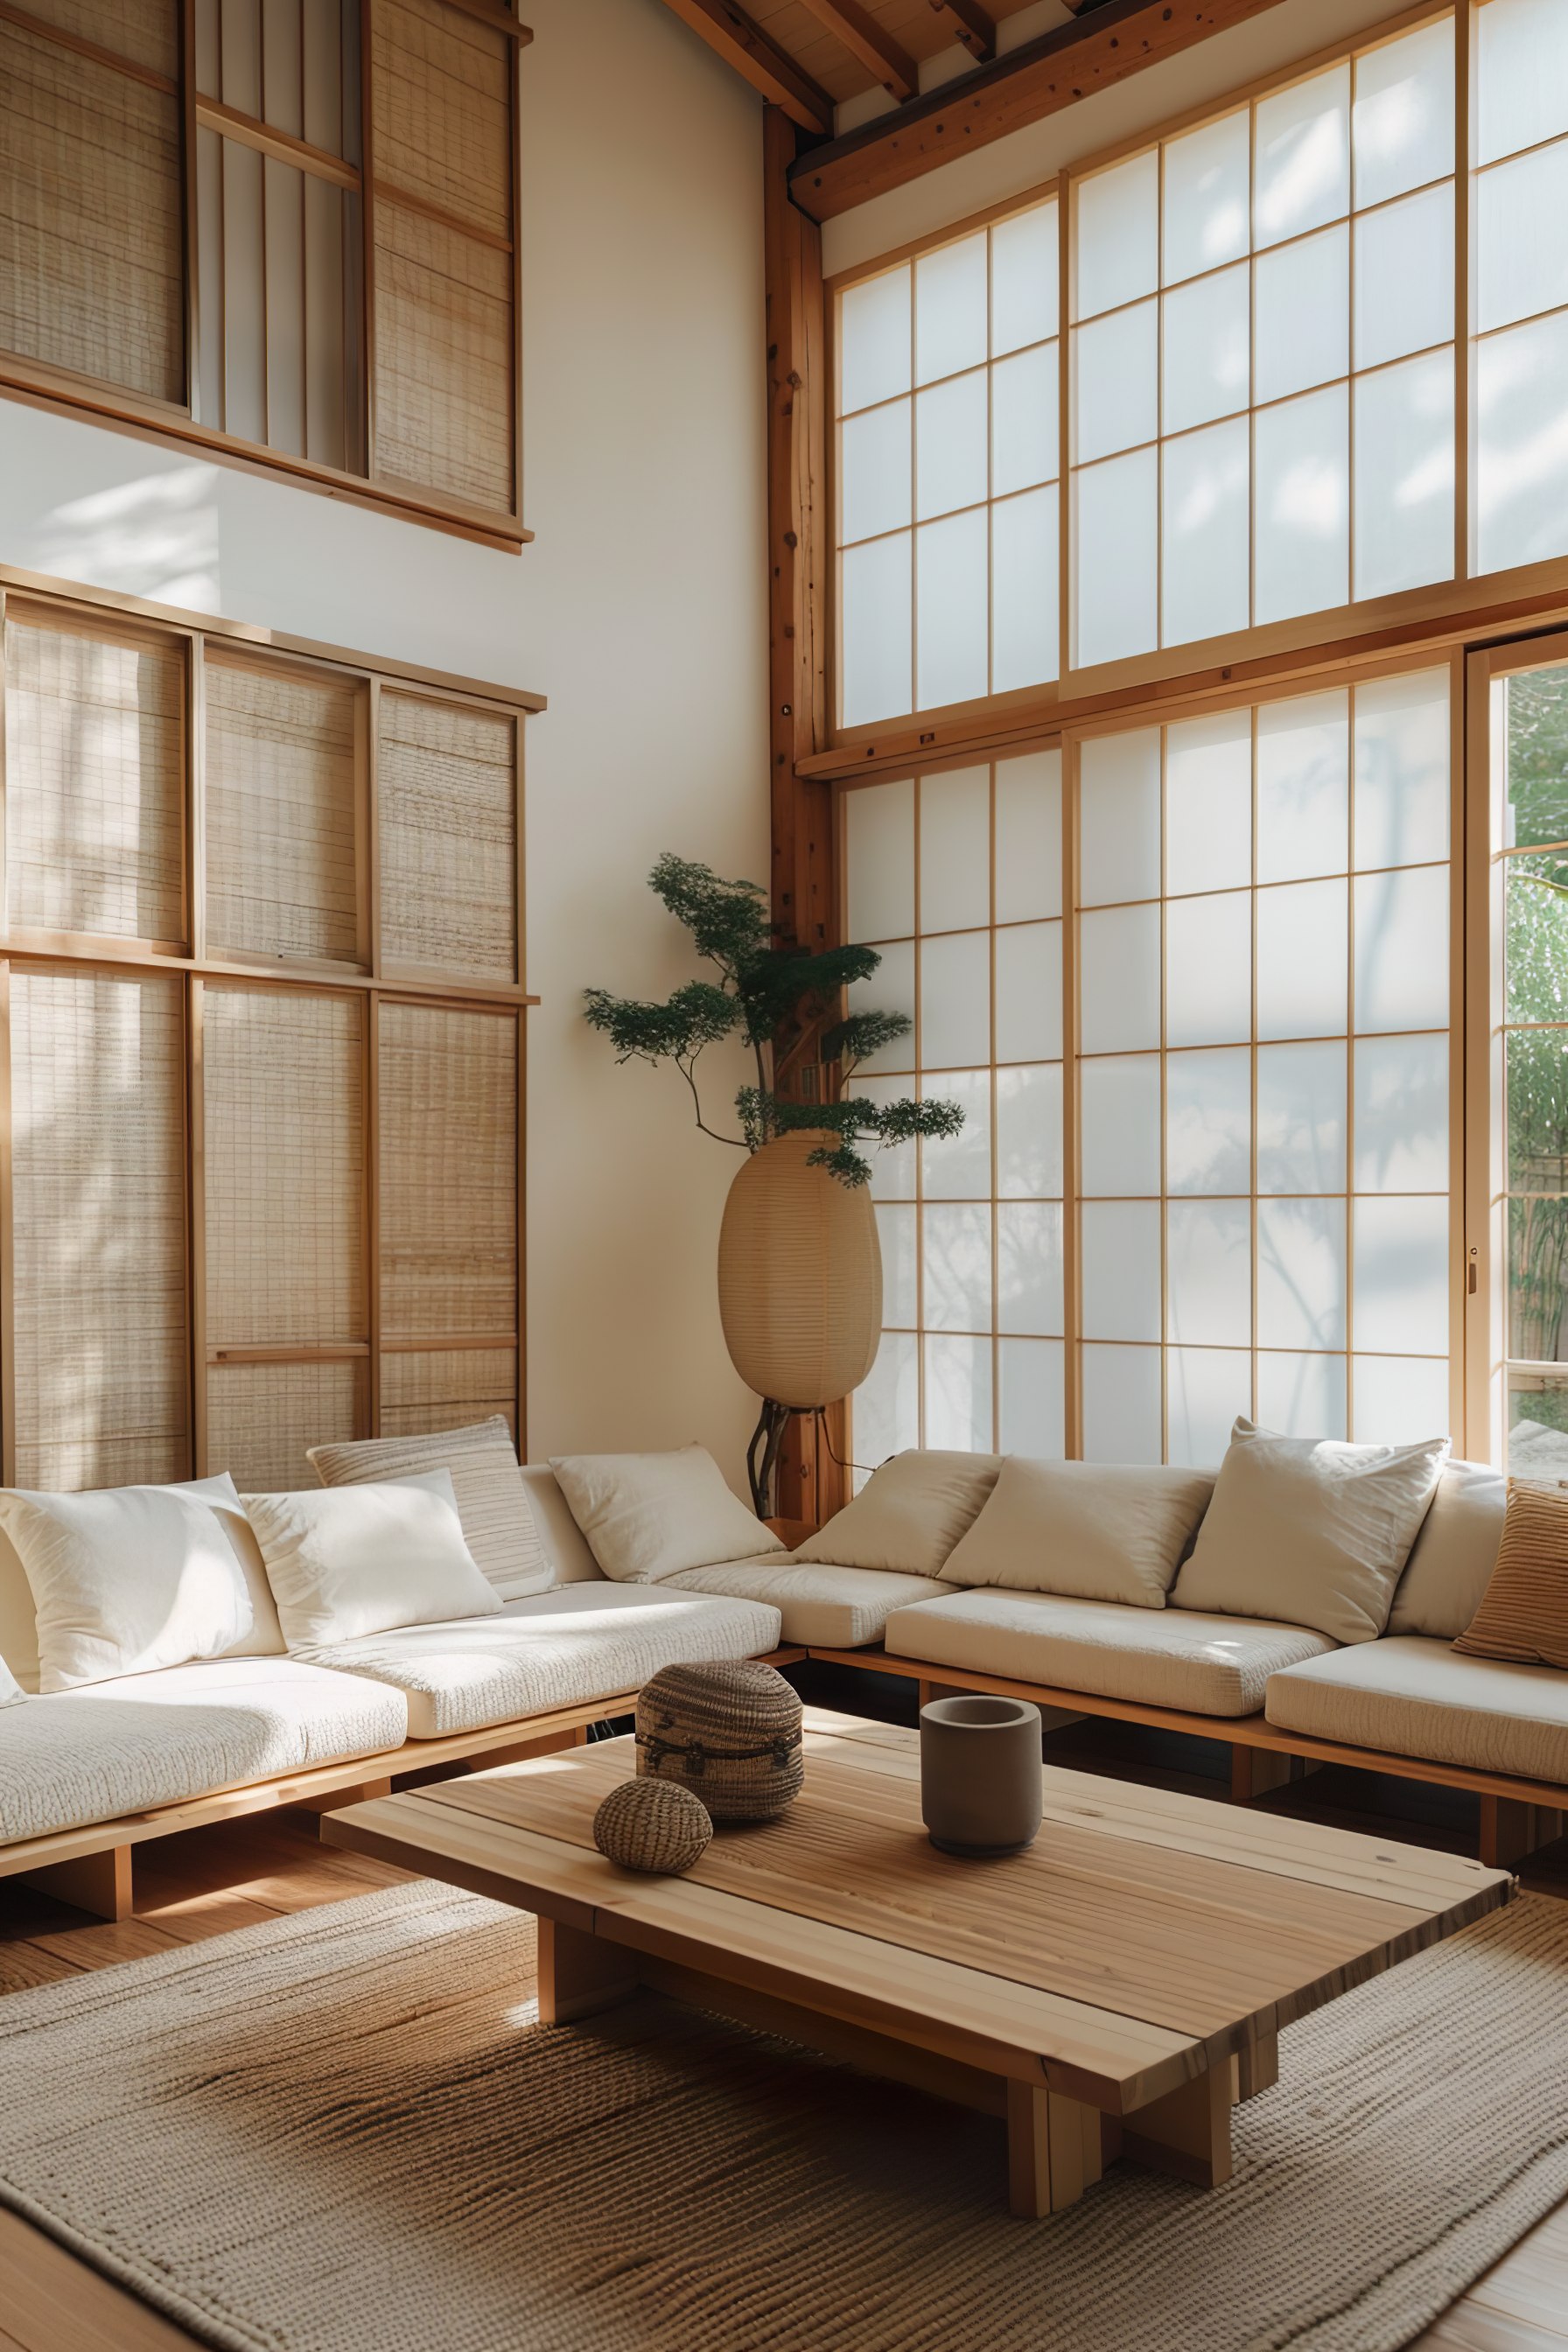 A tranquil Japanese-style living room with wooden furniture, tatami mats, shoji screens, and a potted bonsai.